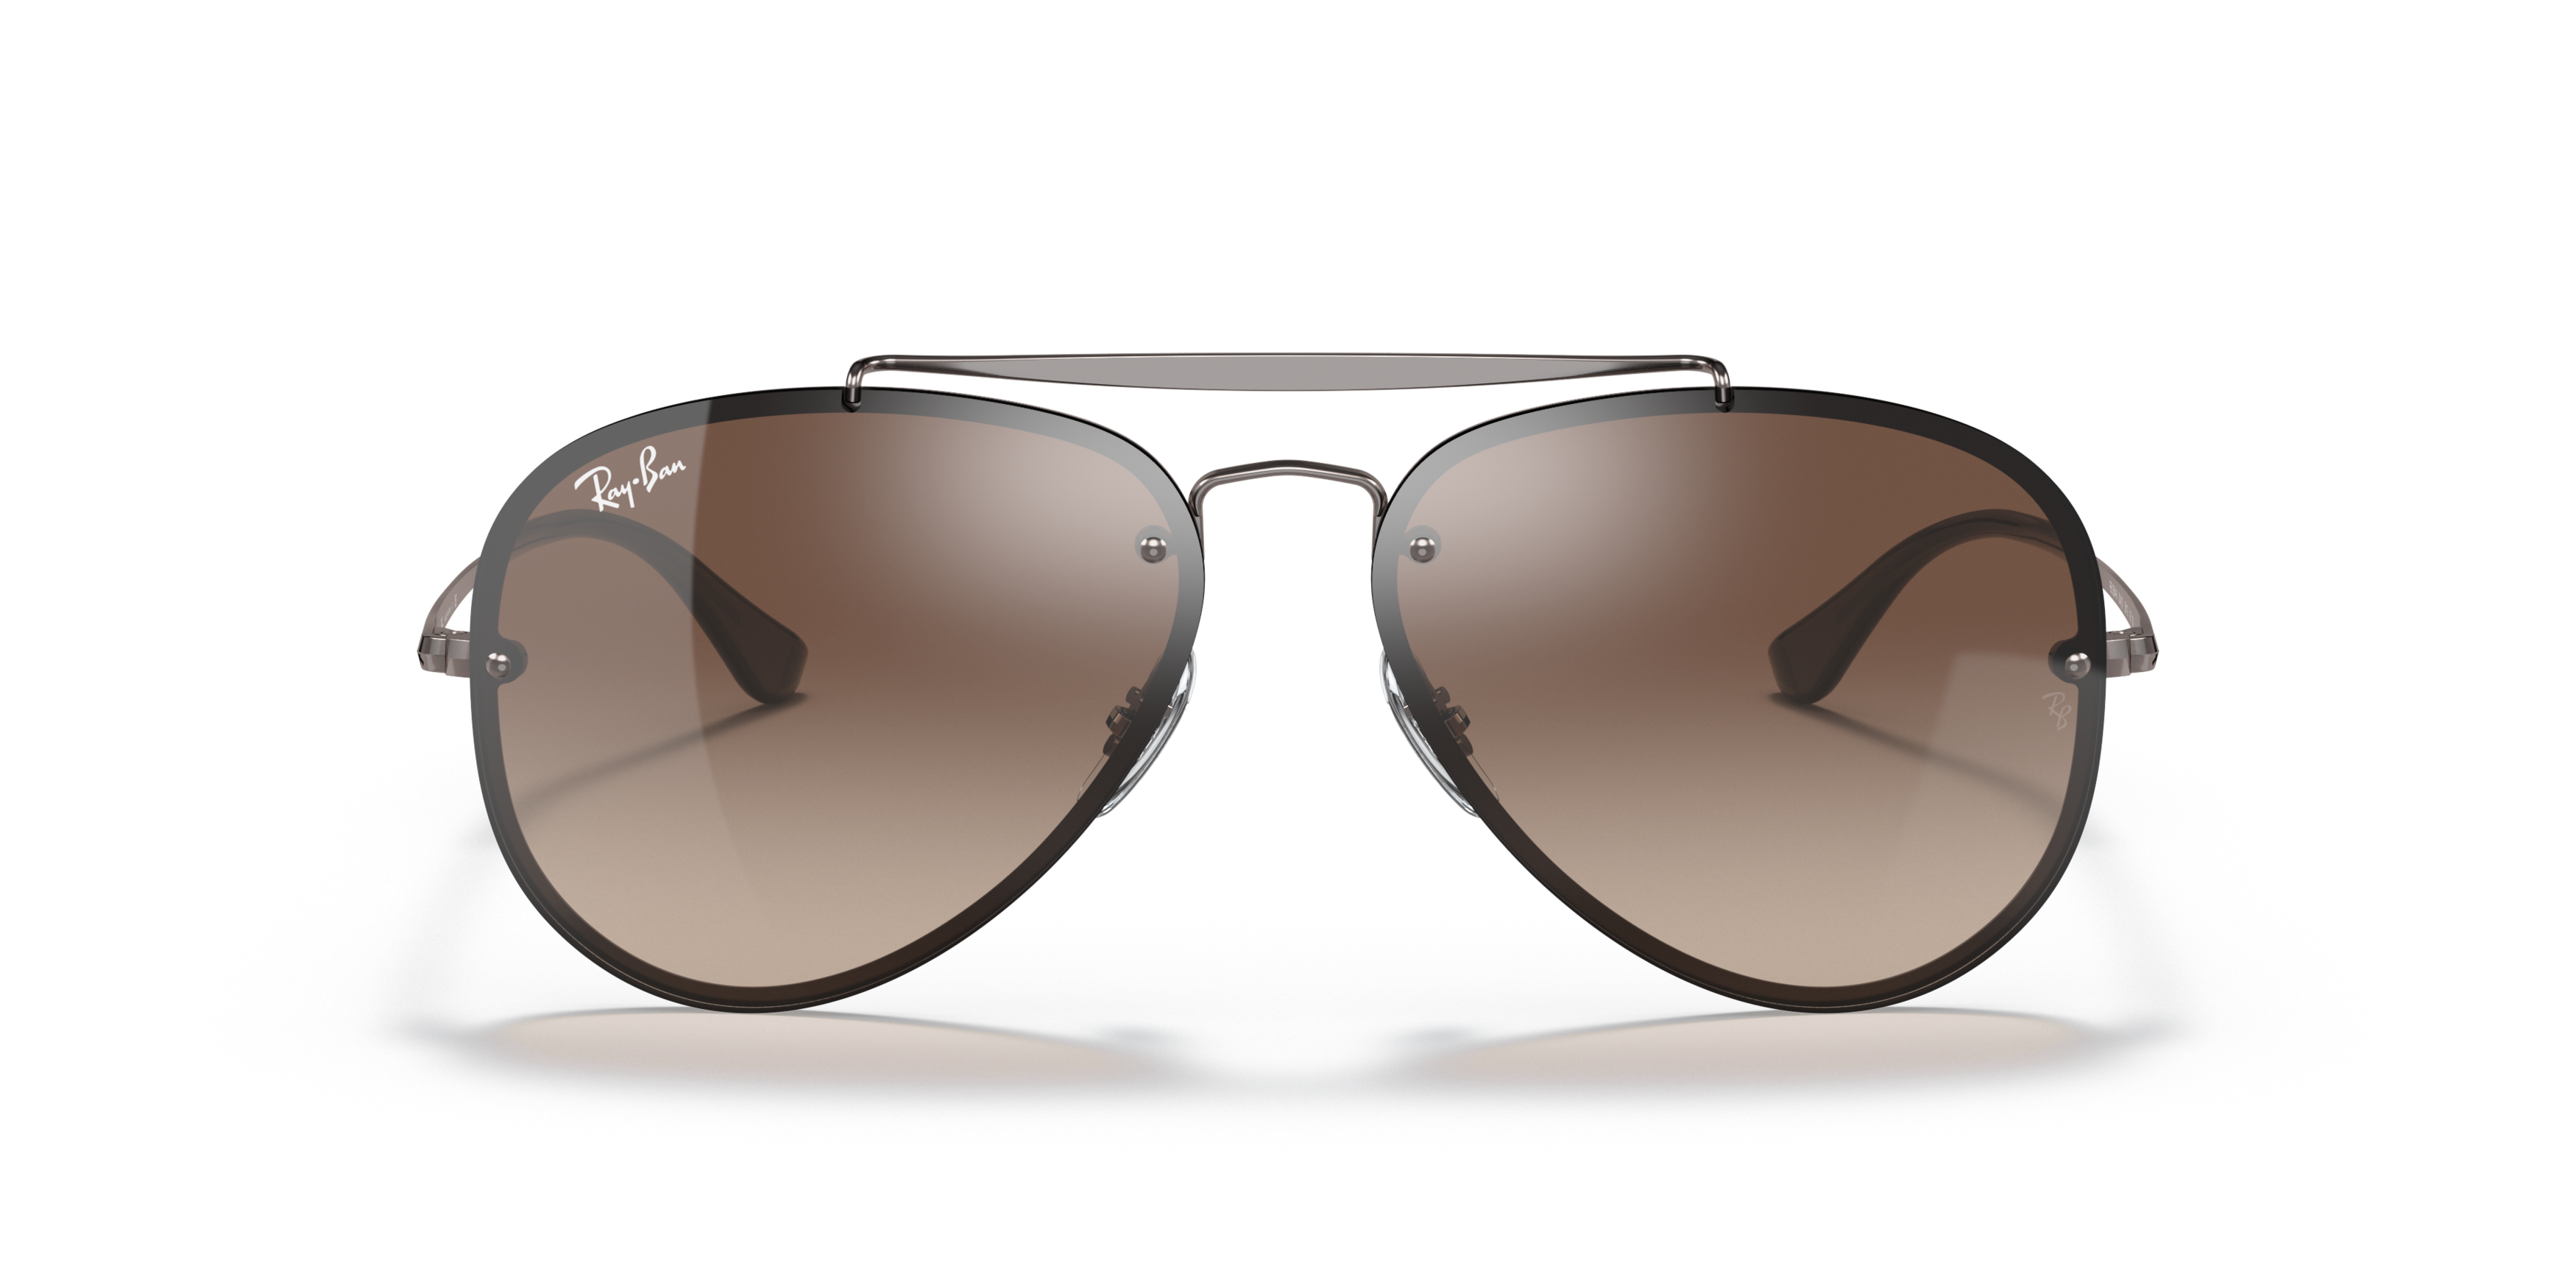 [products.image.front] Ray-Ban RB3584N Blaze Aviator RB3584N 004/13